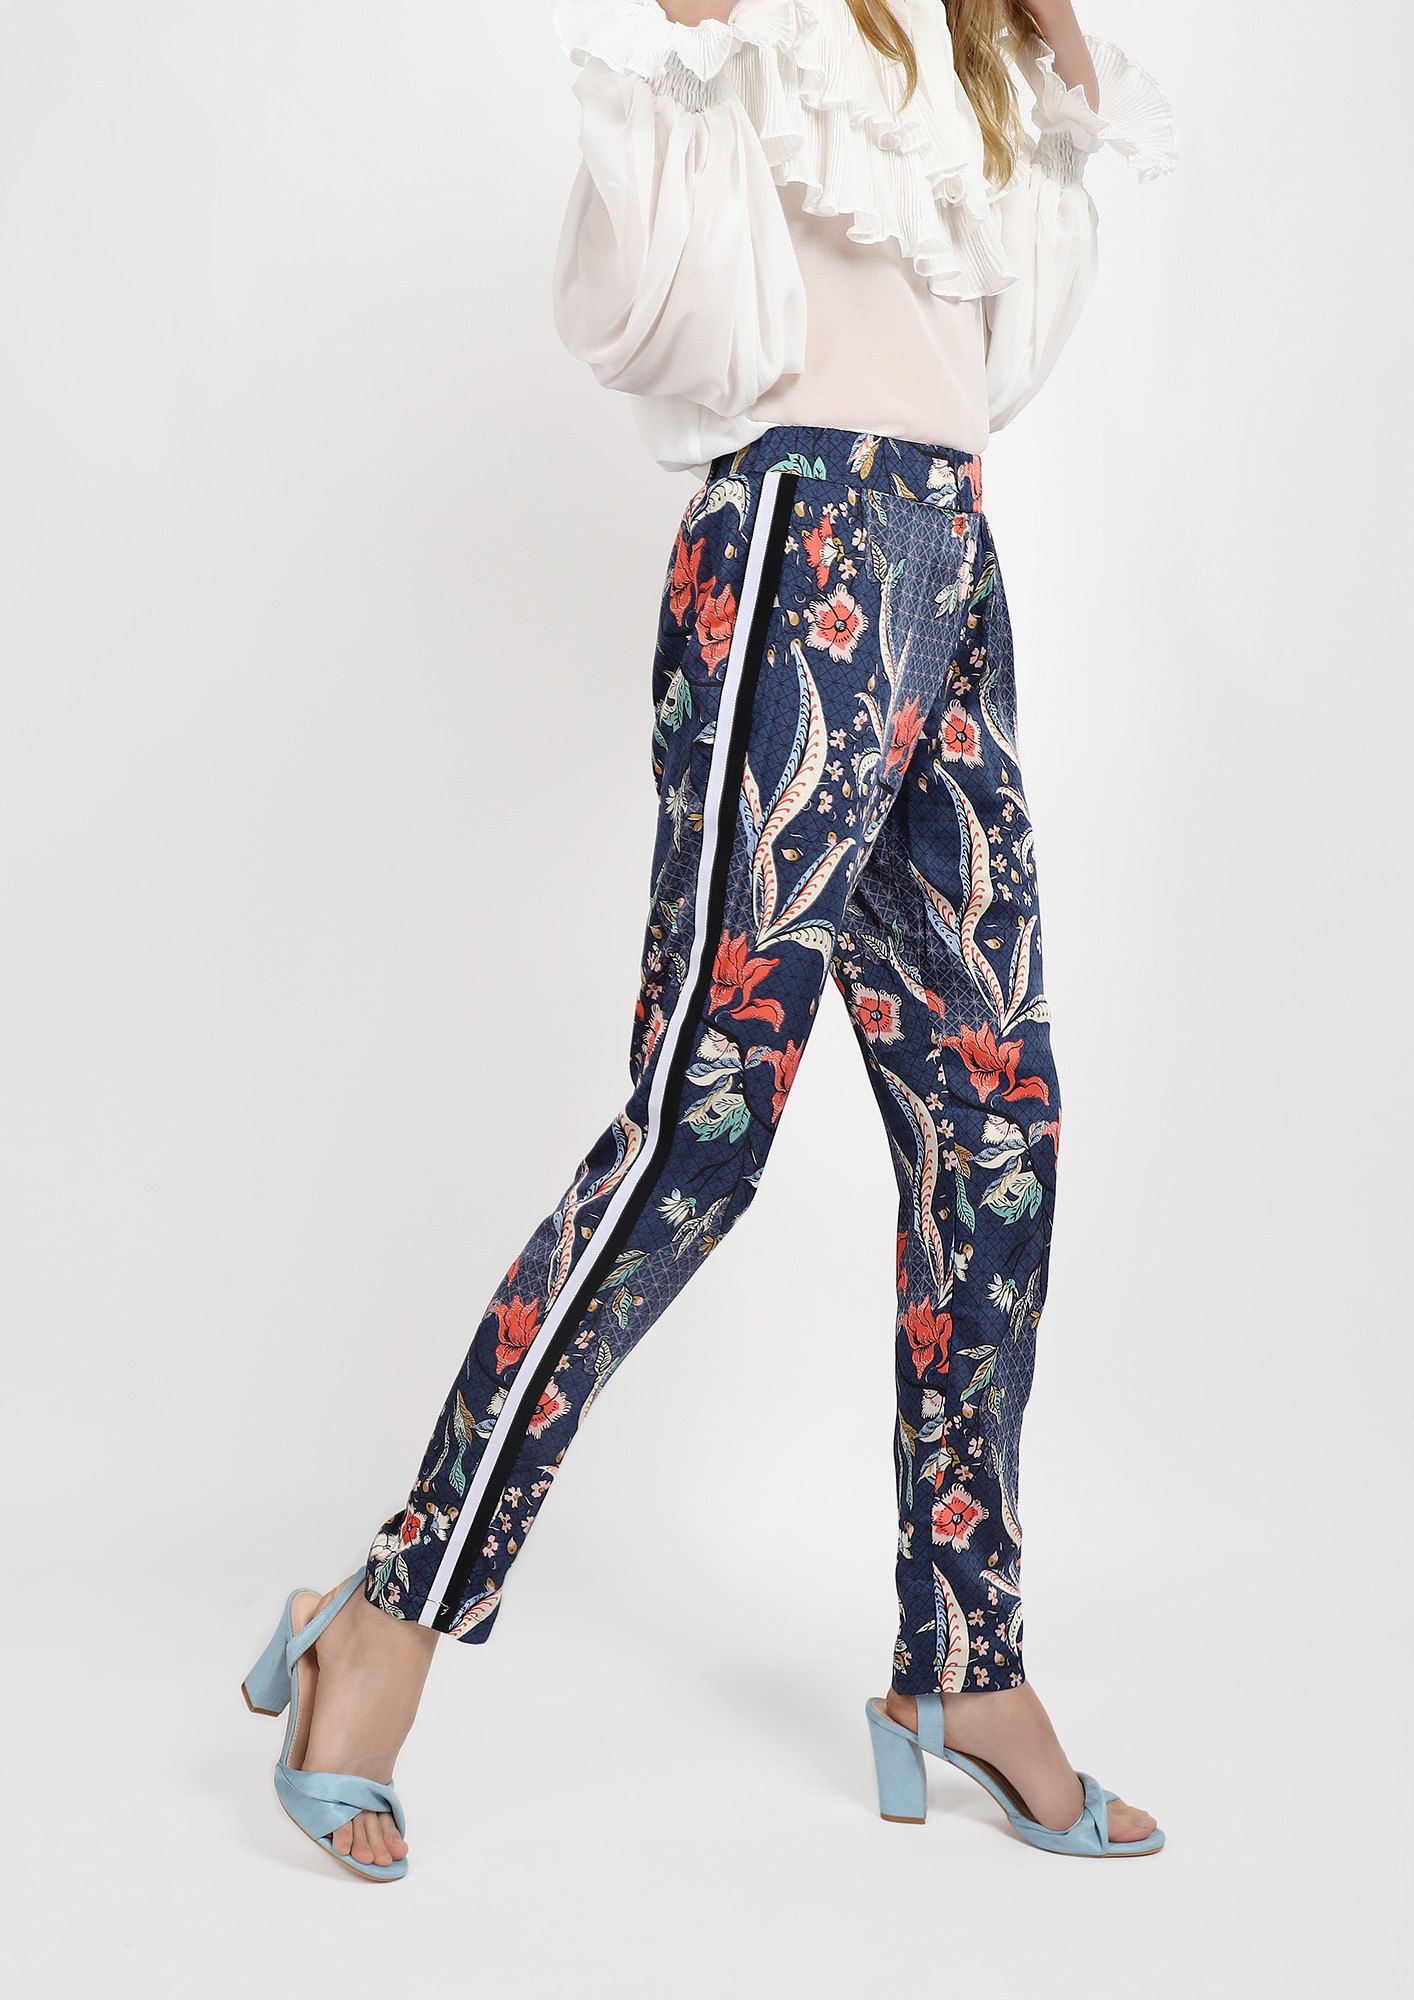 WE WANT IT ALL MULTI FLORAL TROUSERS